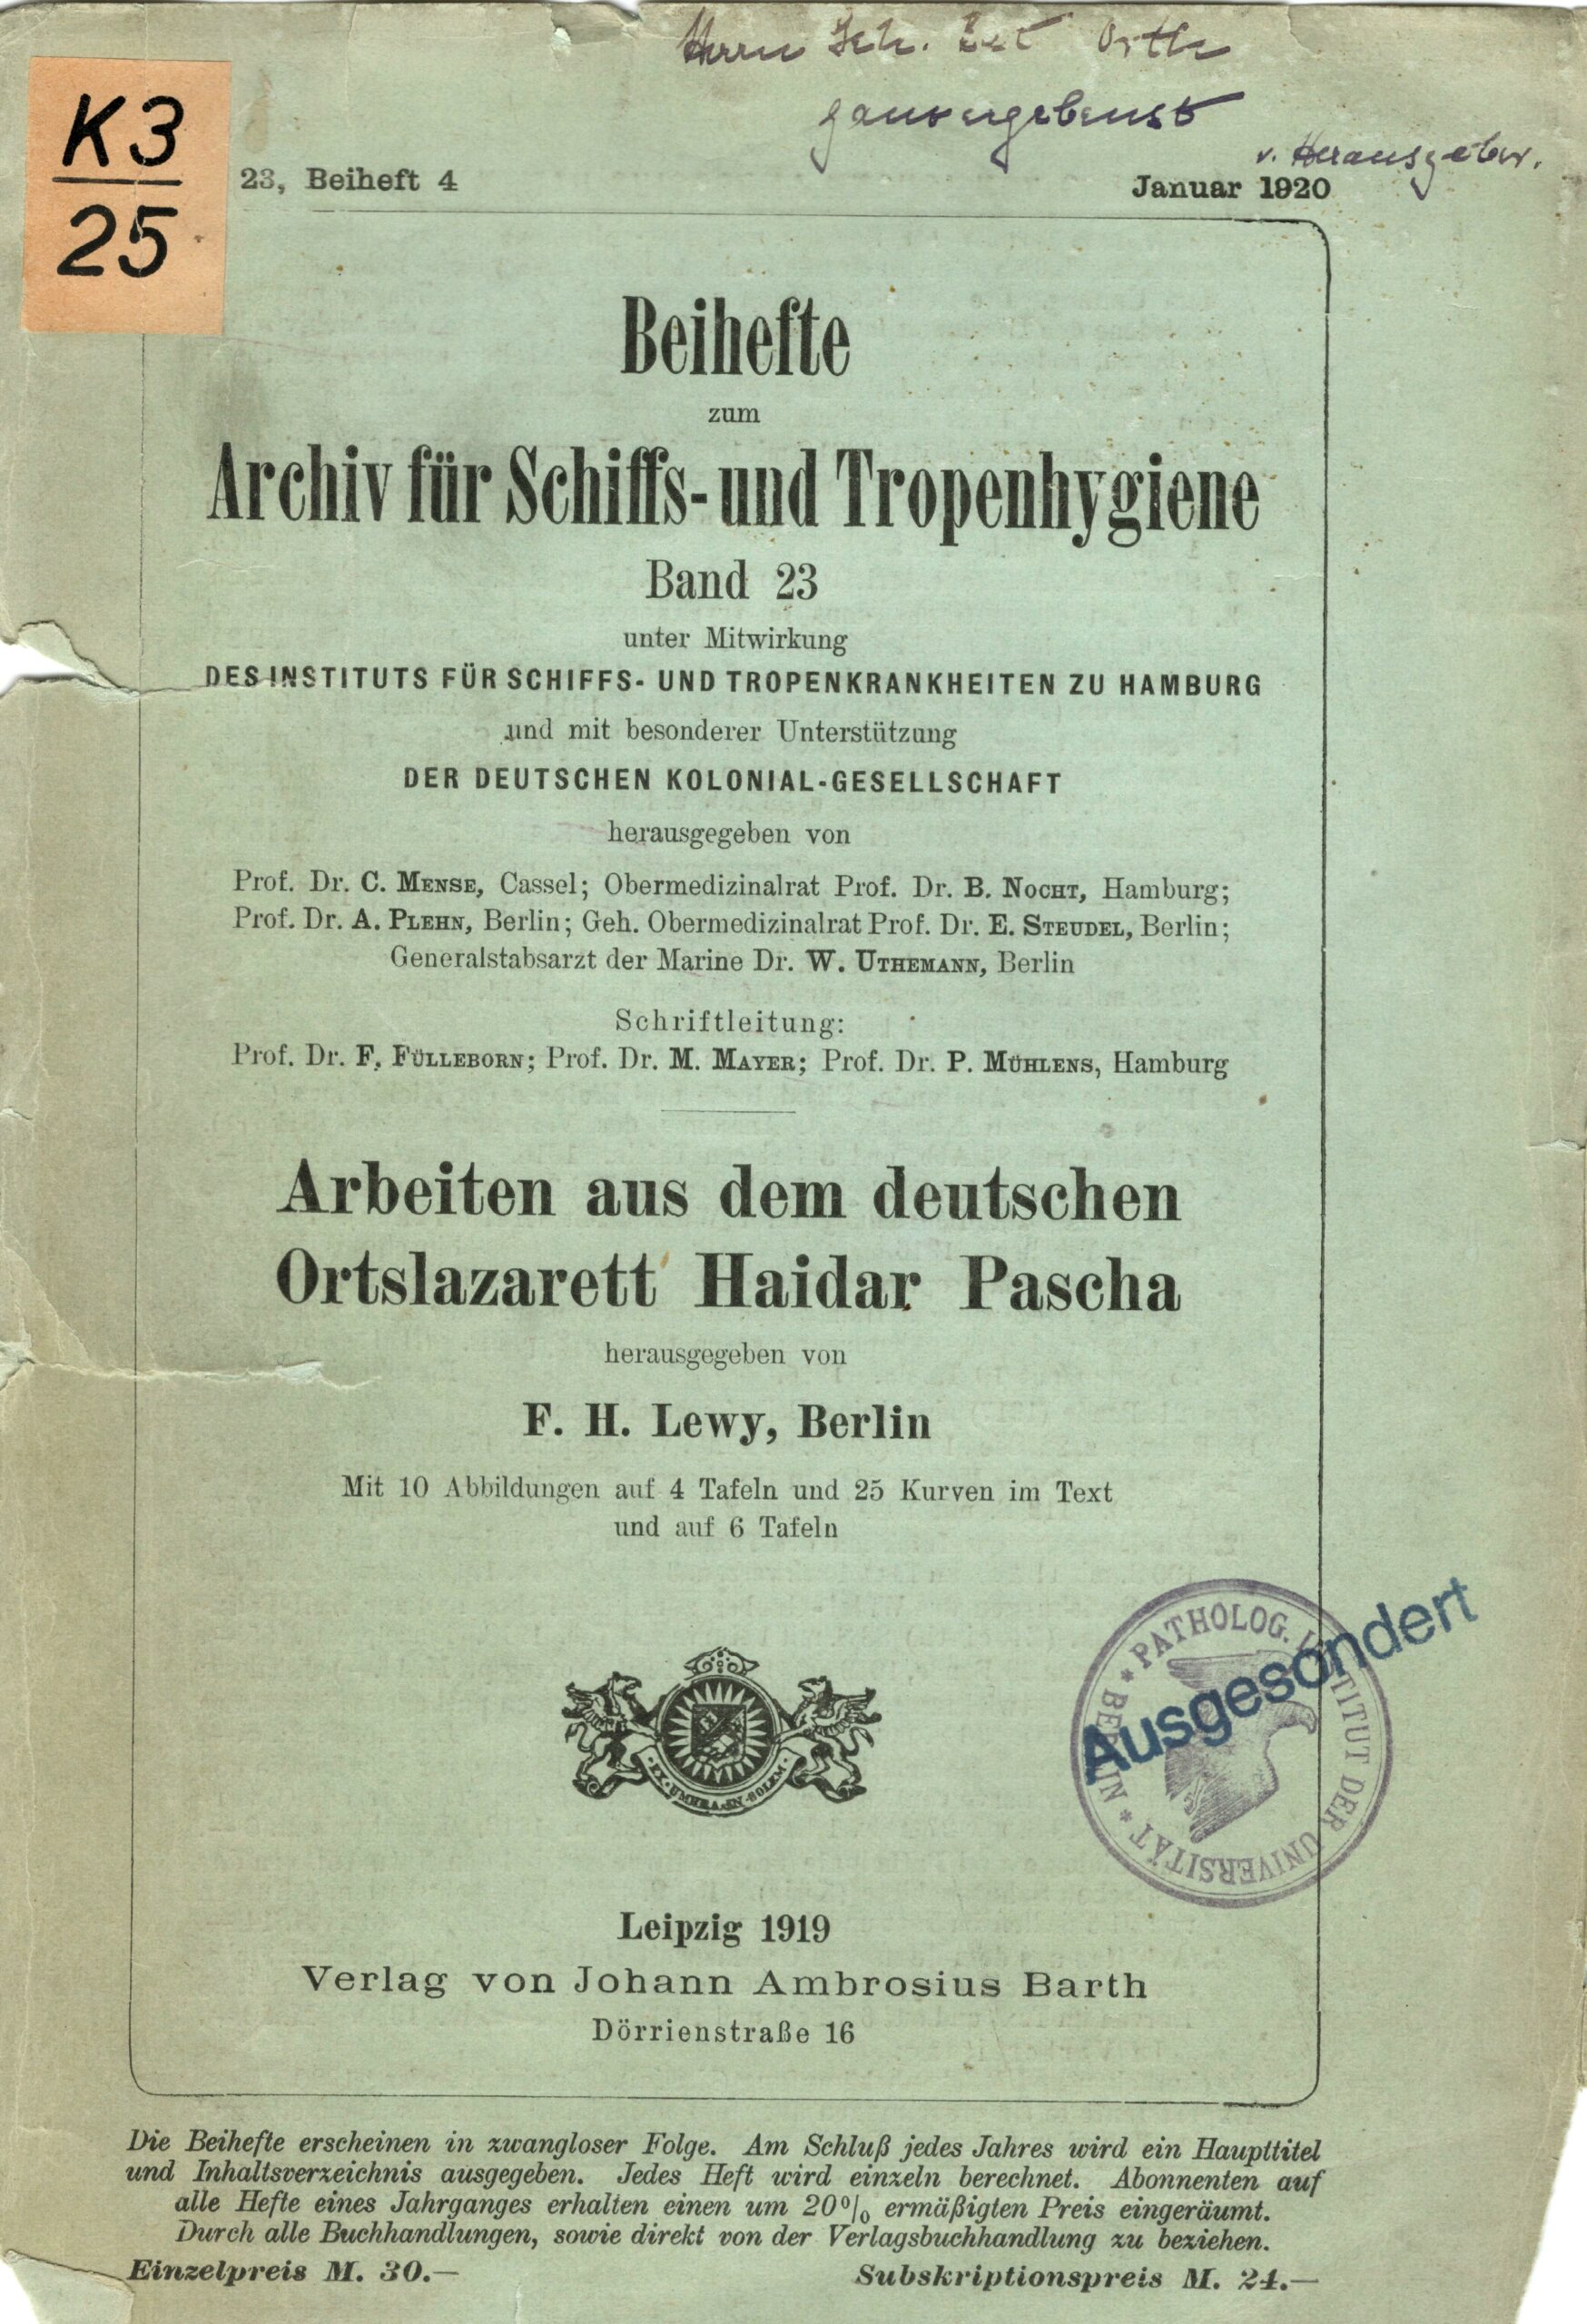 Publication about The German Local Hospital Haidar Pasha, 1919, Archive H Je